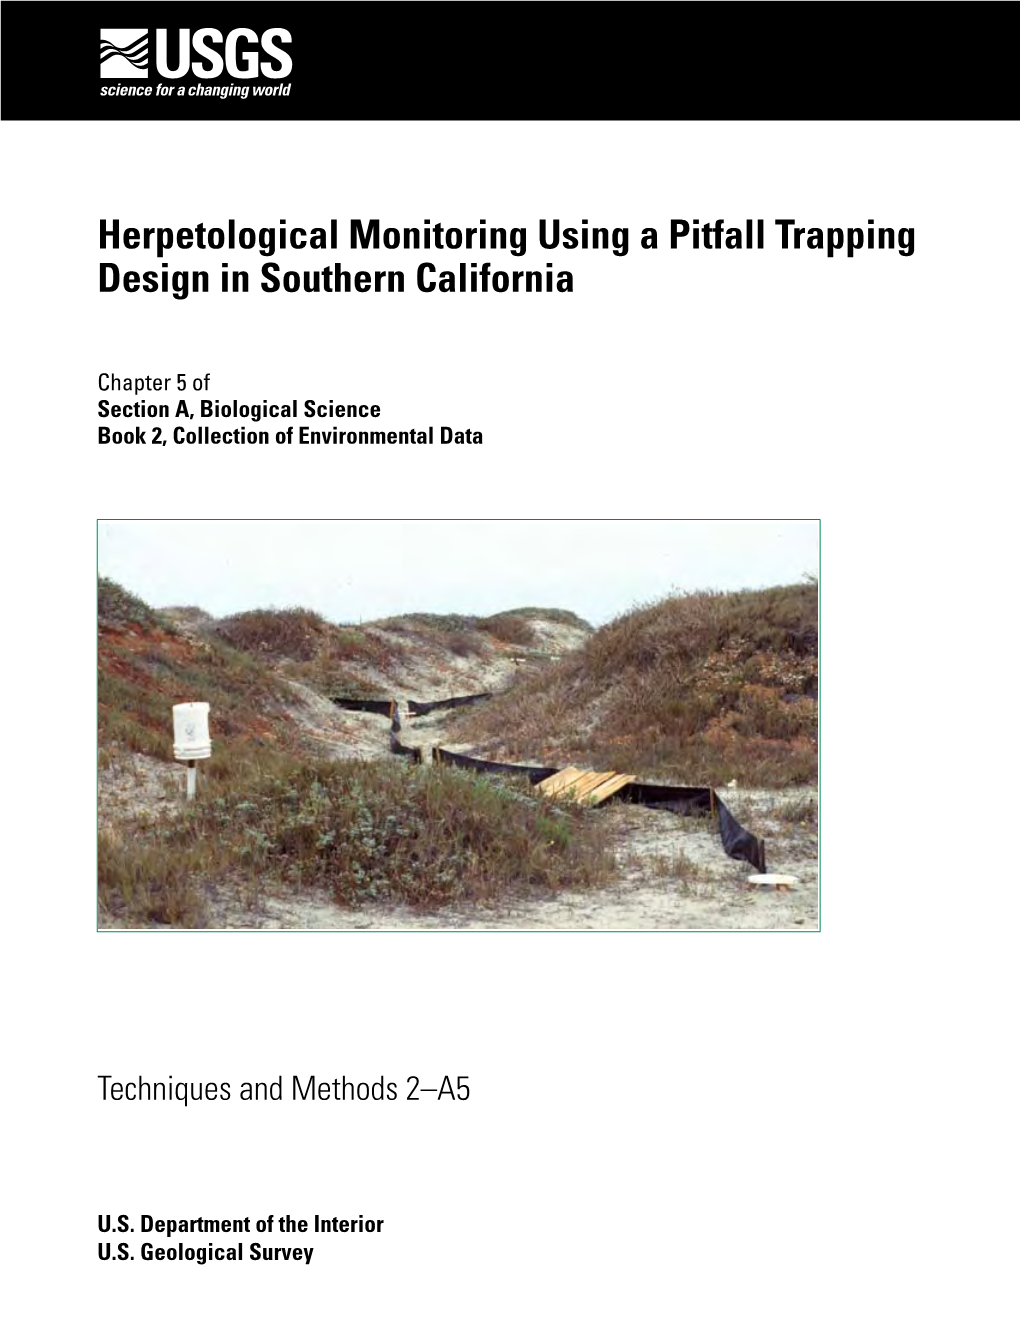 Herpetological Monitoring Using a Pitfall Trapping Design in Southern California